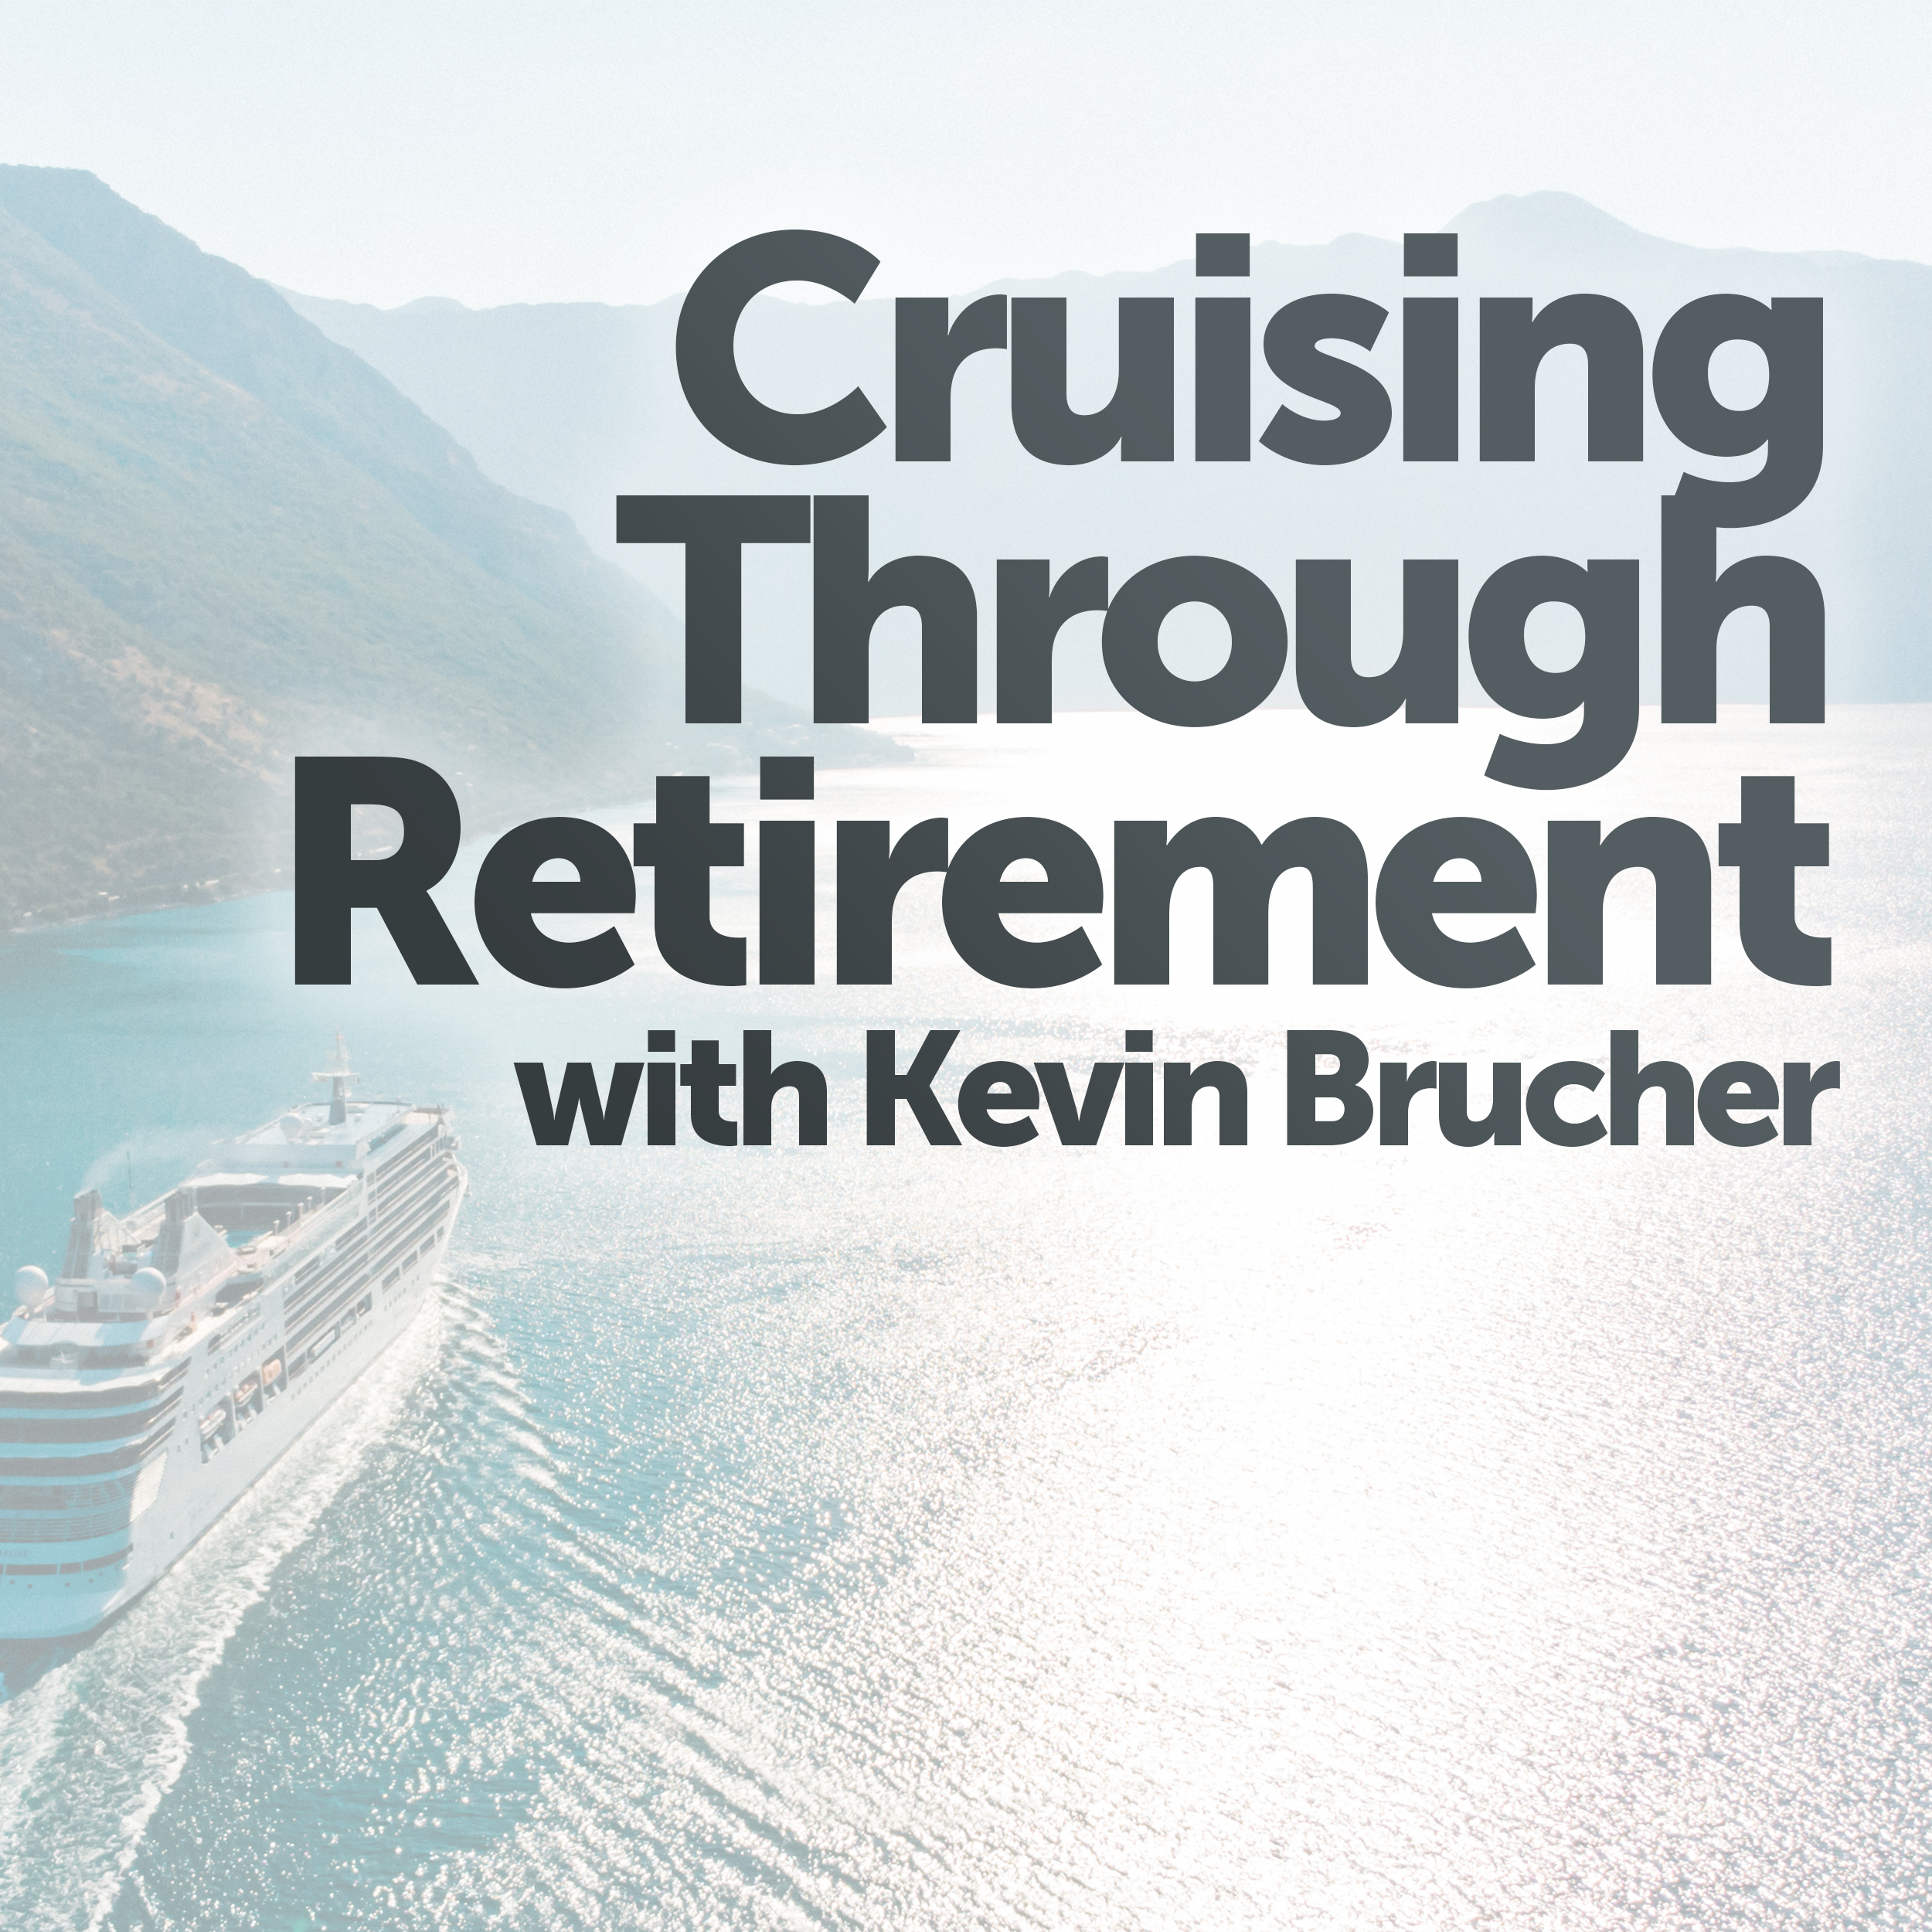 Kevin Brucher discusses various signs that indicate a person may not be able to retire successfully.